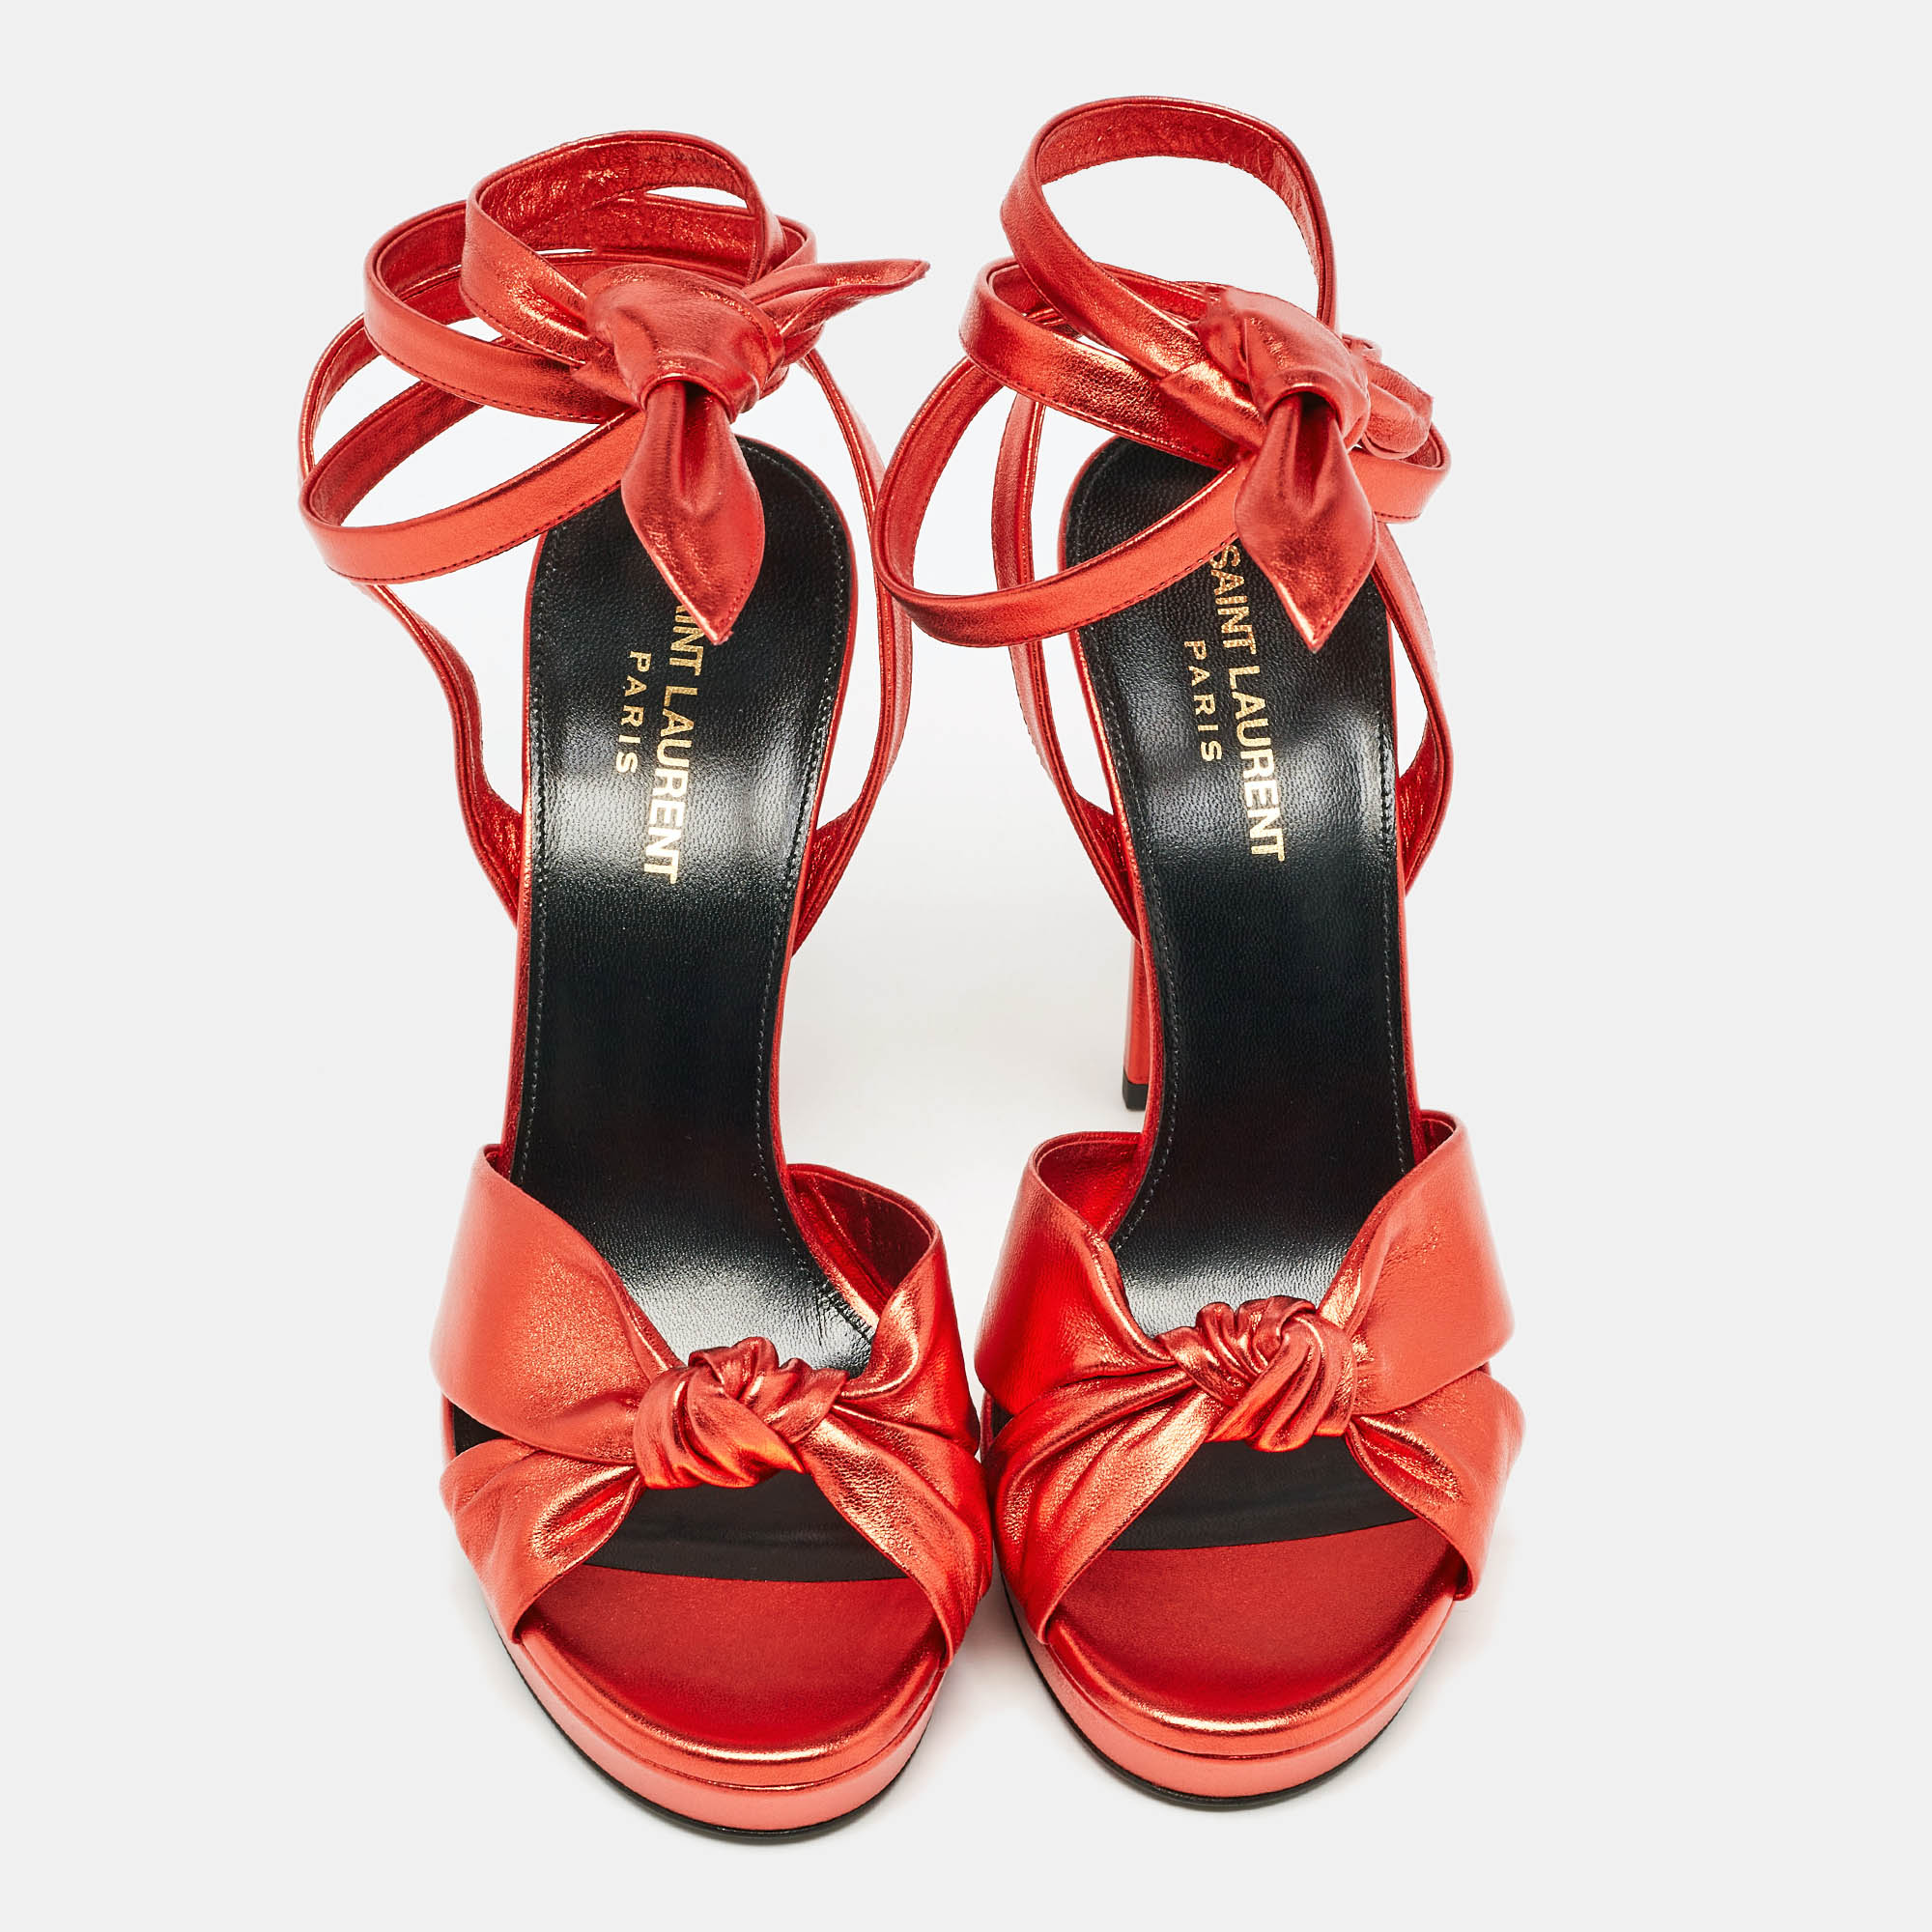 Yves Saint Laurent Red Leather Knotted Ankle Wrap Sandals Size 38